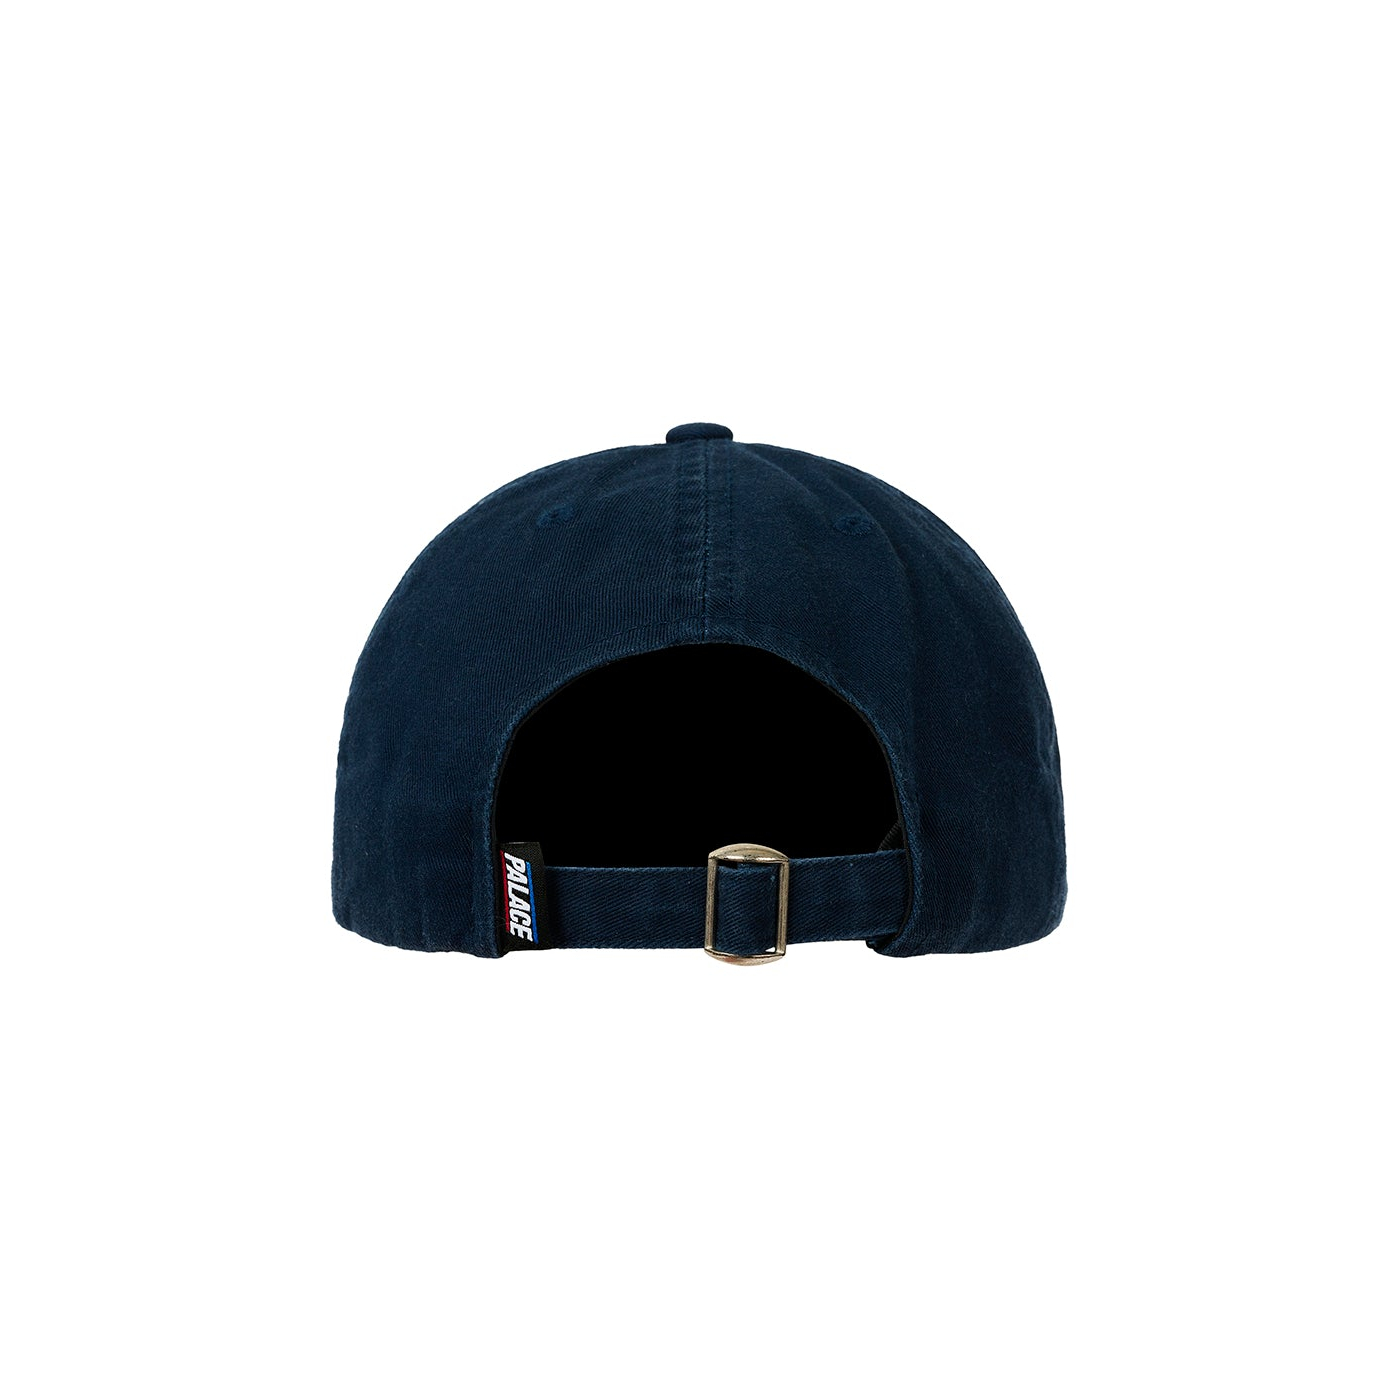 Thumbnail BASICALLY A 6-PANEL NAVY one color